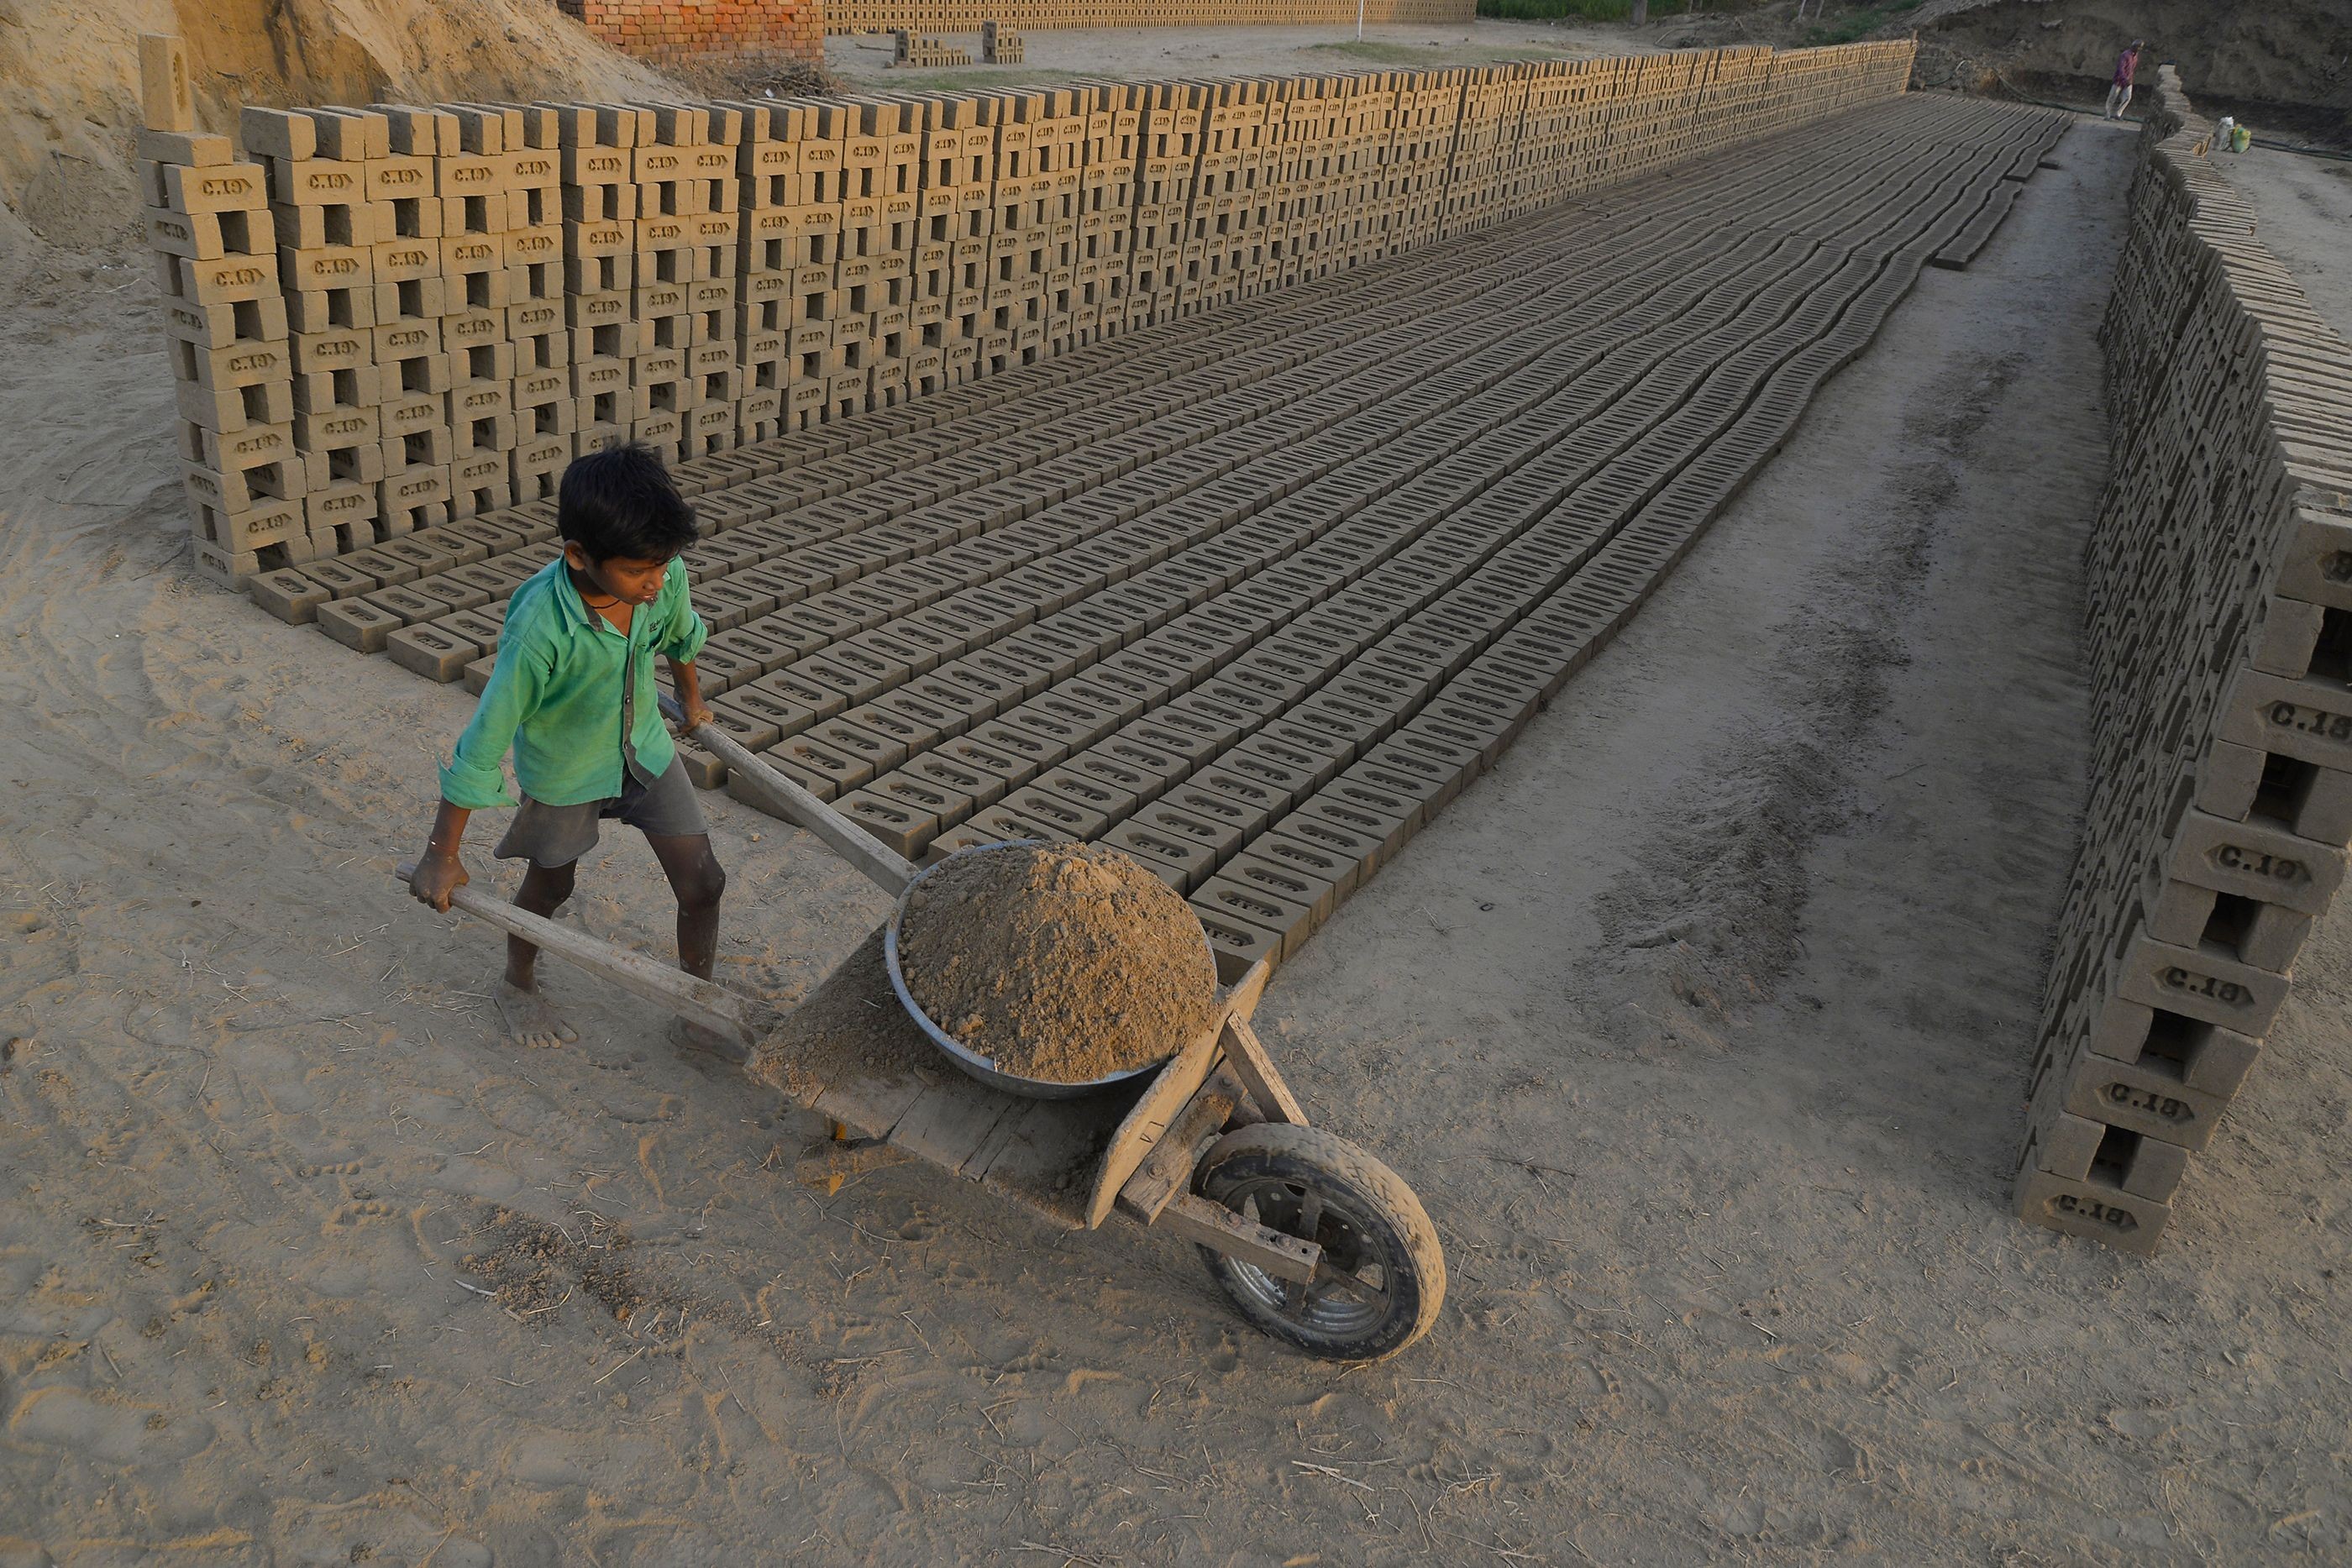 An Indian boy works in a brick kiln on the outskirts of Jalandhar on September 18. Many brick kiln workers in India are trapped in a cycle of bonded labour and regularly cheated out of promised wages, according to anti-slavery groups. Photo: AFP